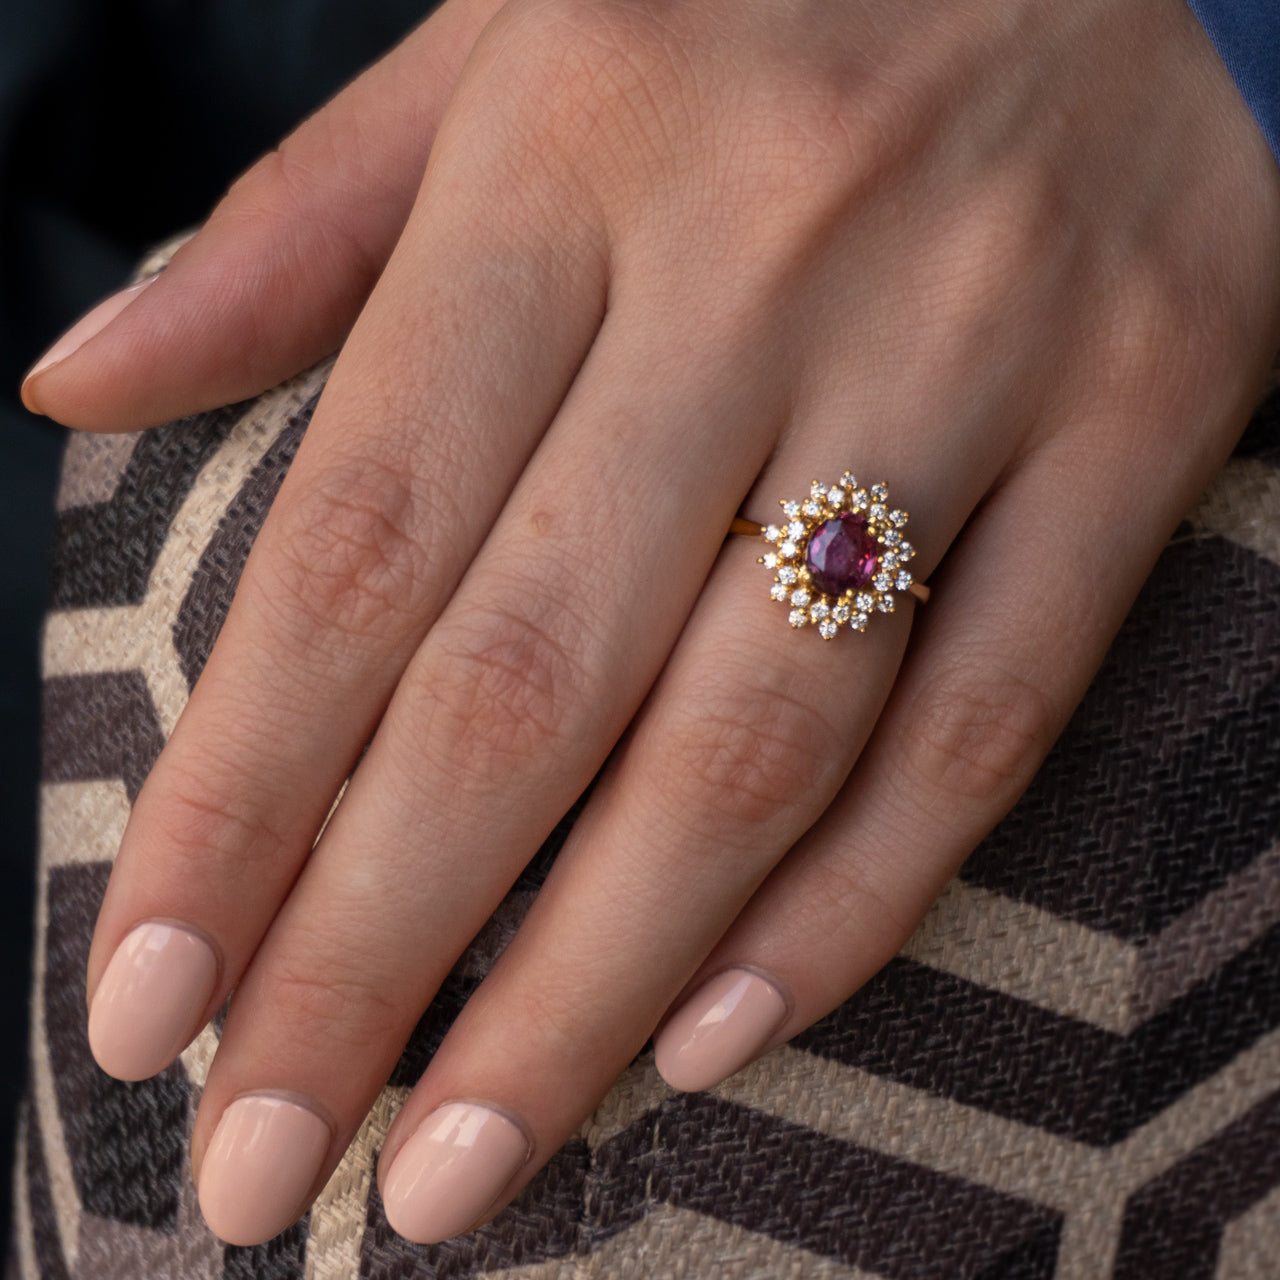 A woman's hand displaying a 1.28ct pink sapphire ring in an 18k yellow gold setting